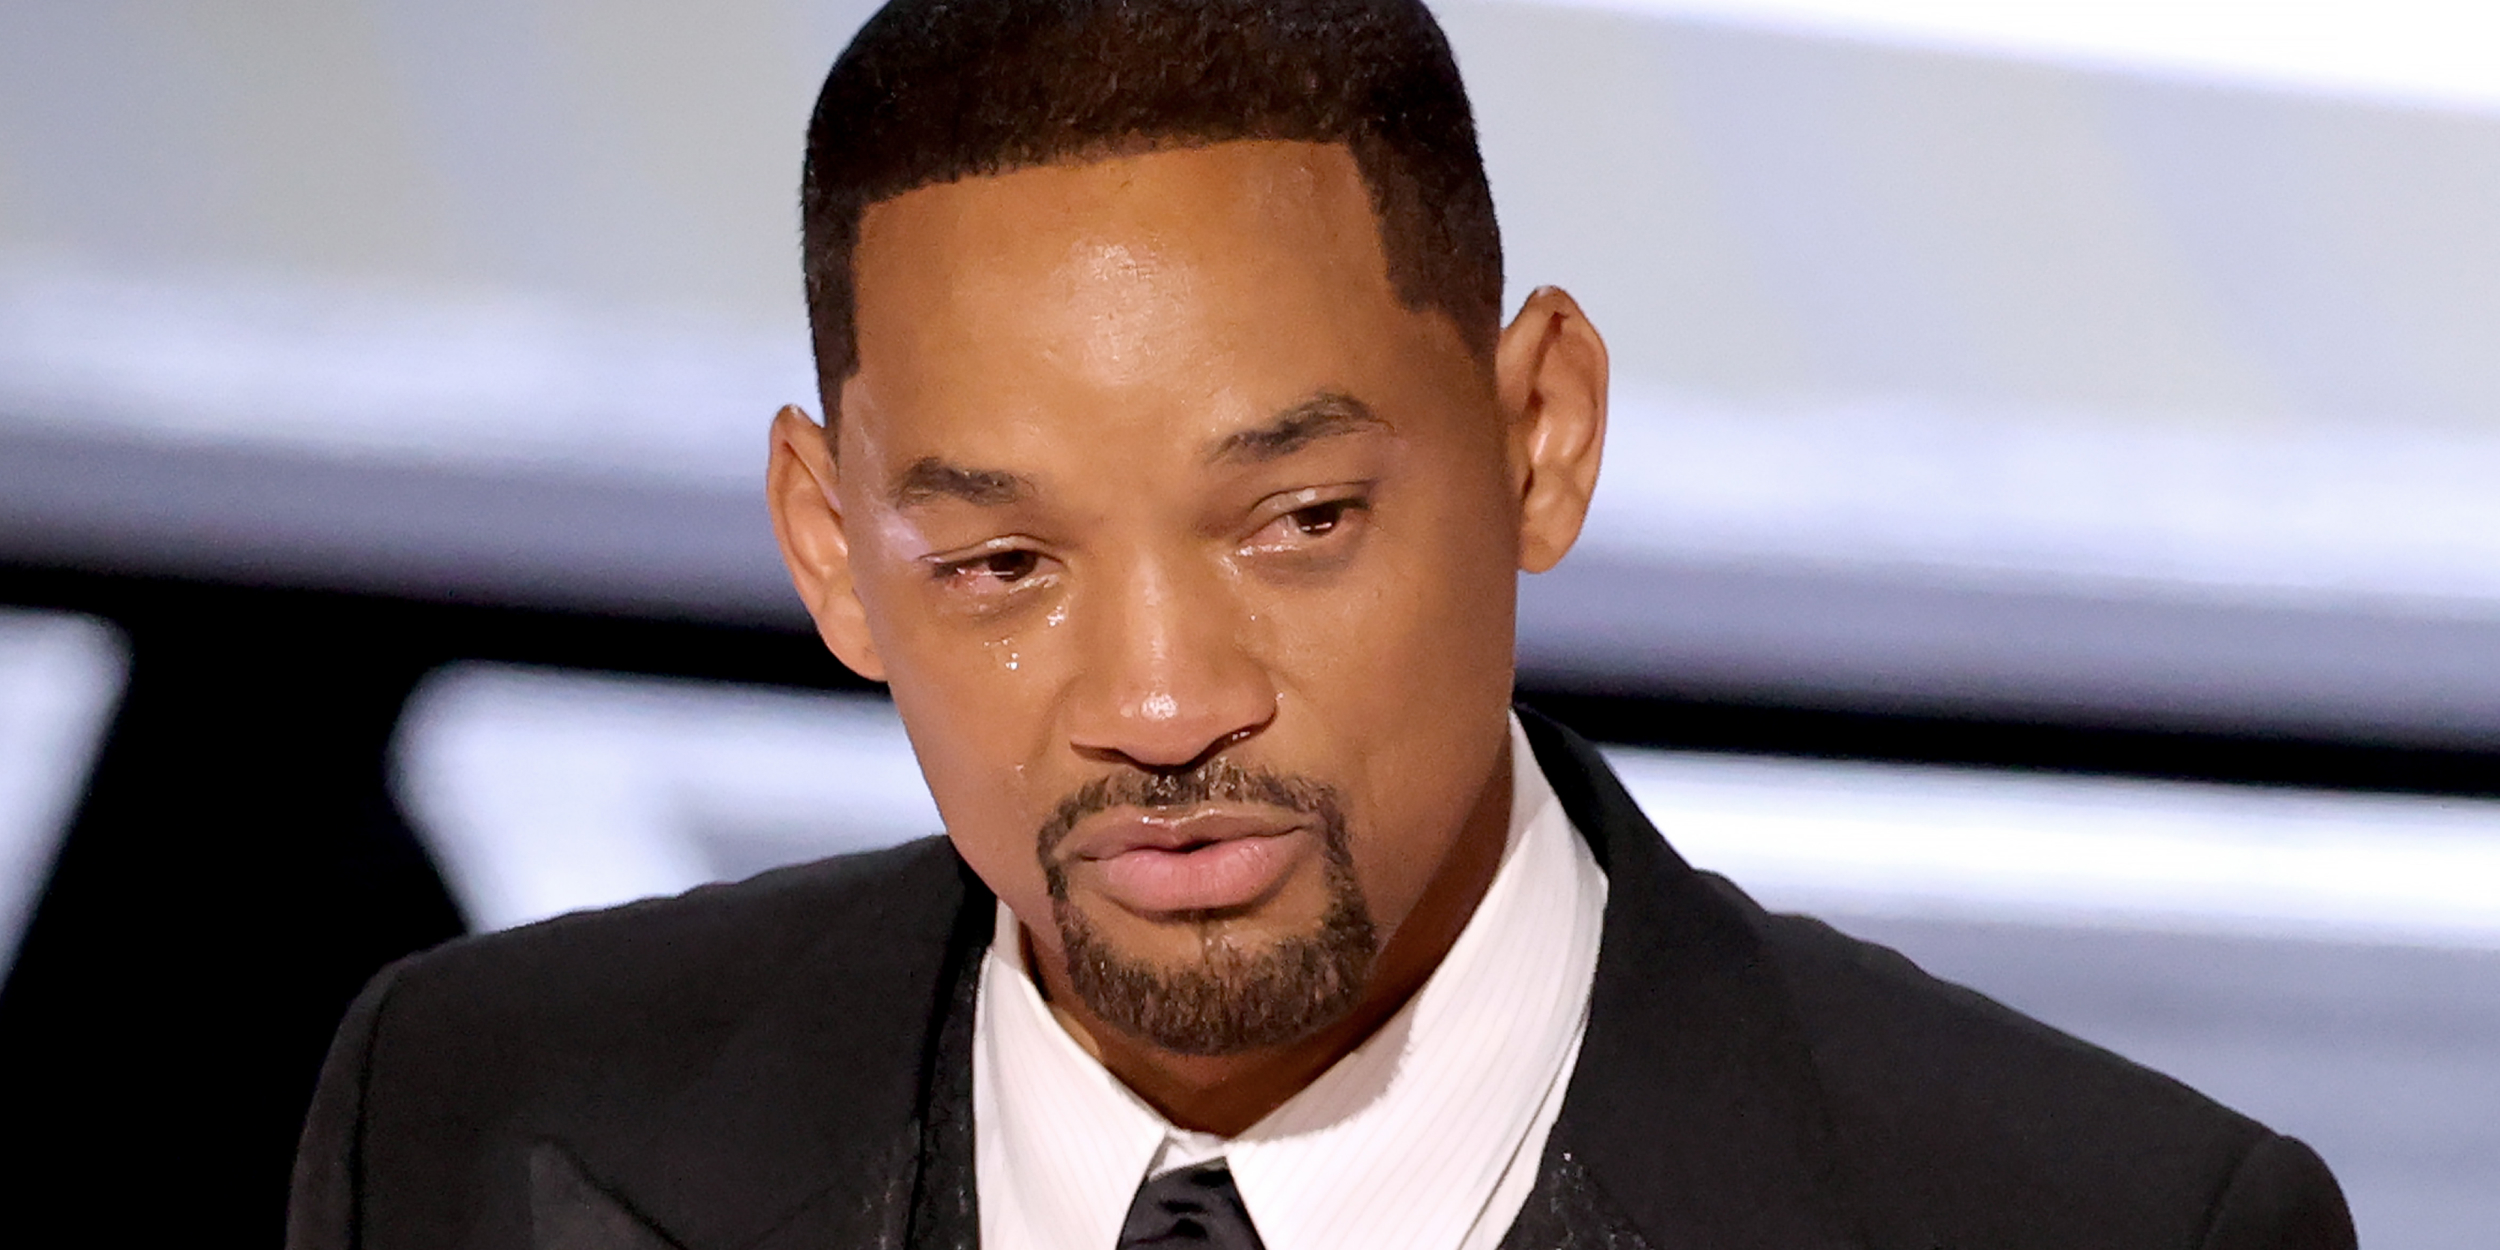 WILL SMITH REACTS TO A TEN-YEAR ACADEMY PROHIBITION